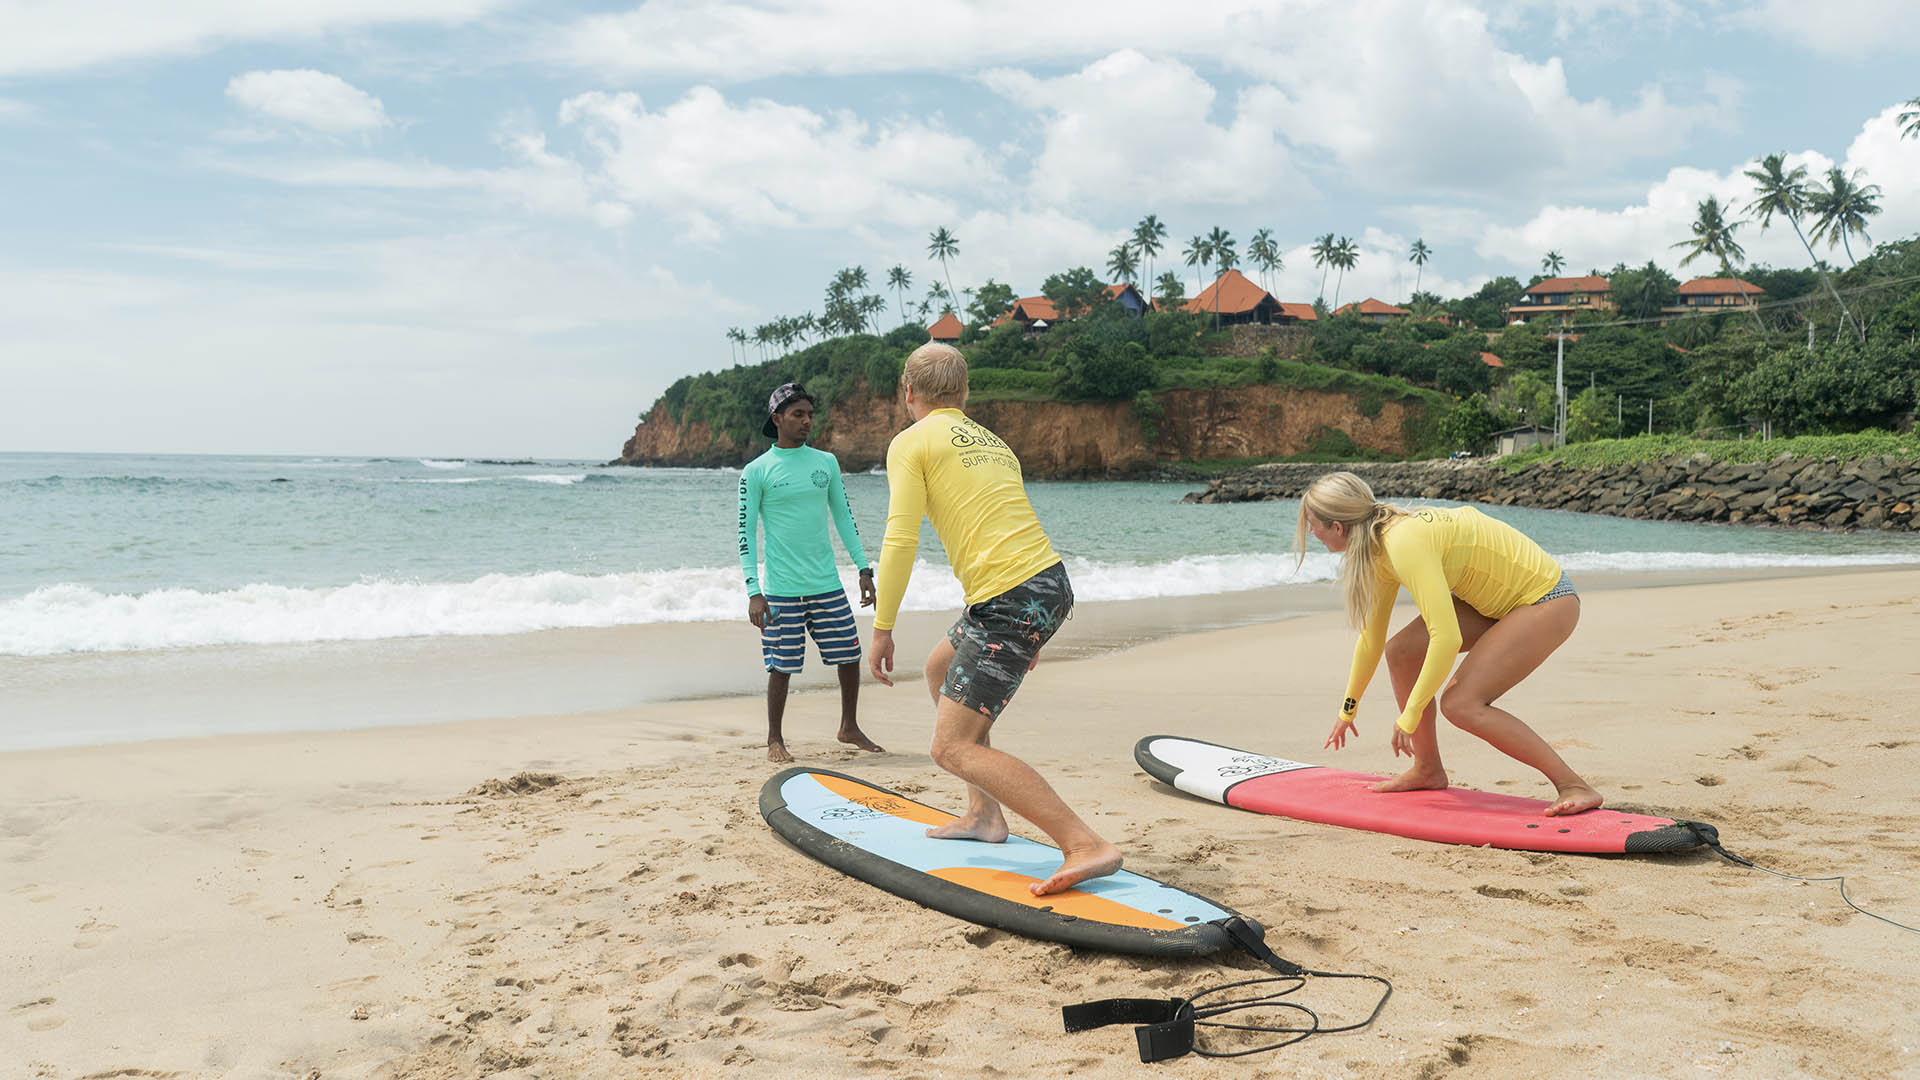 Surfing Bali- Tips for Beginners to Ride the Waves like a Pro